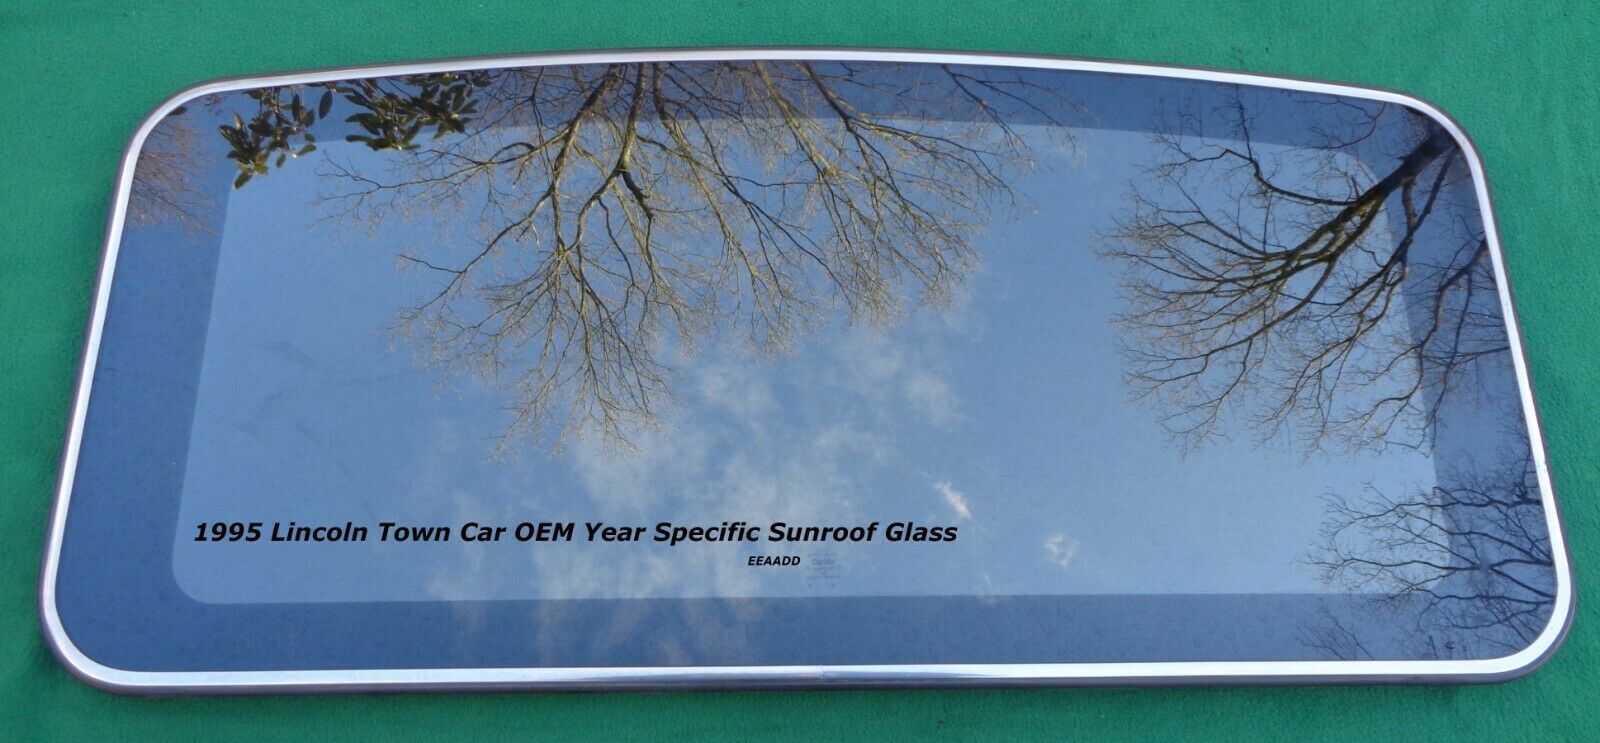 1995 LINCOLN TOWN CAR YEAR SPECIFIC OEM FACTORY SUNROOF GLASS FREE SHIPPING! - $295.00